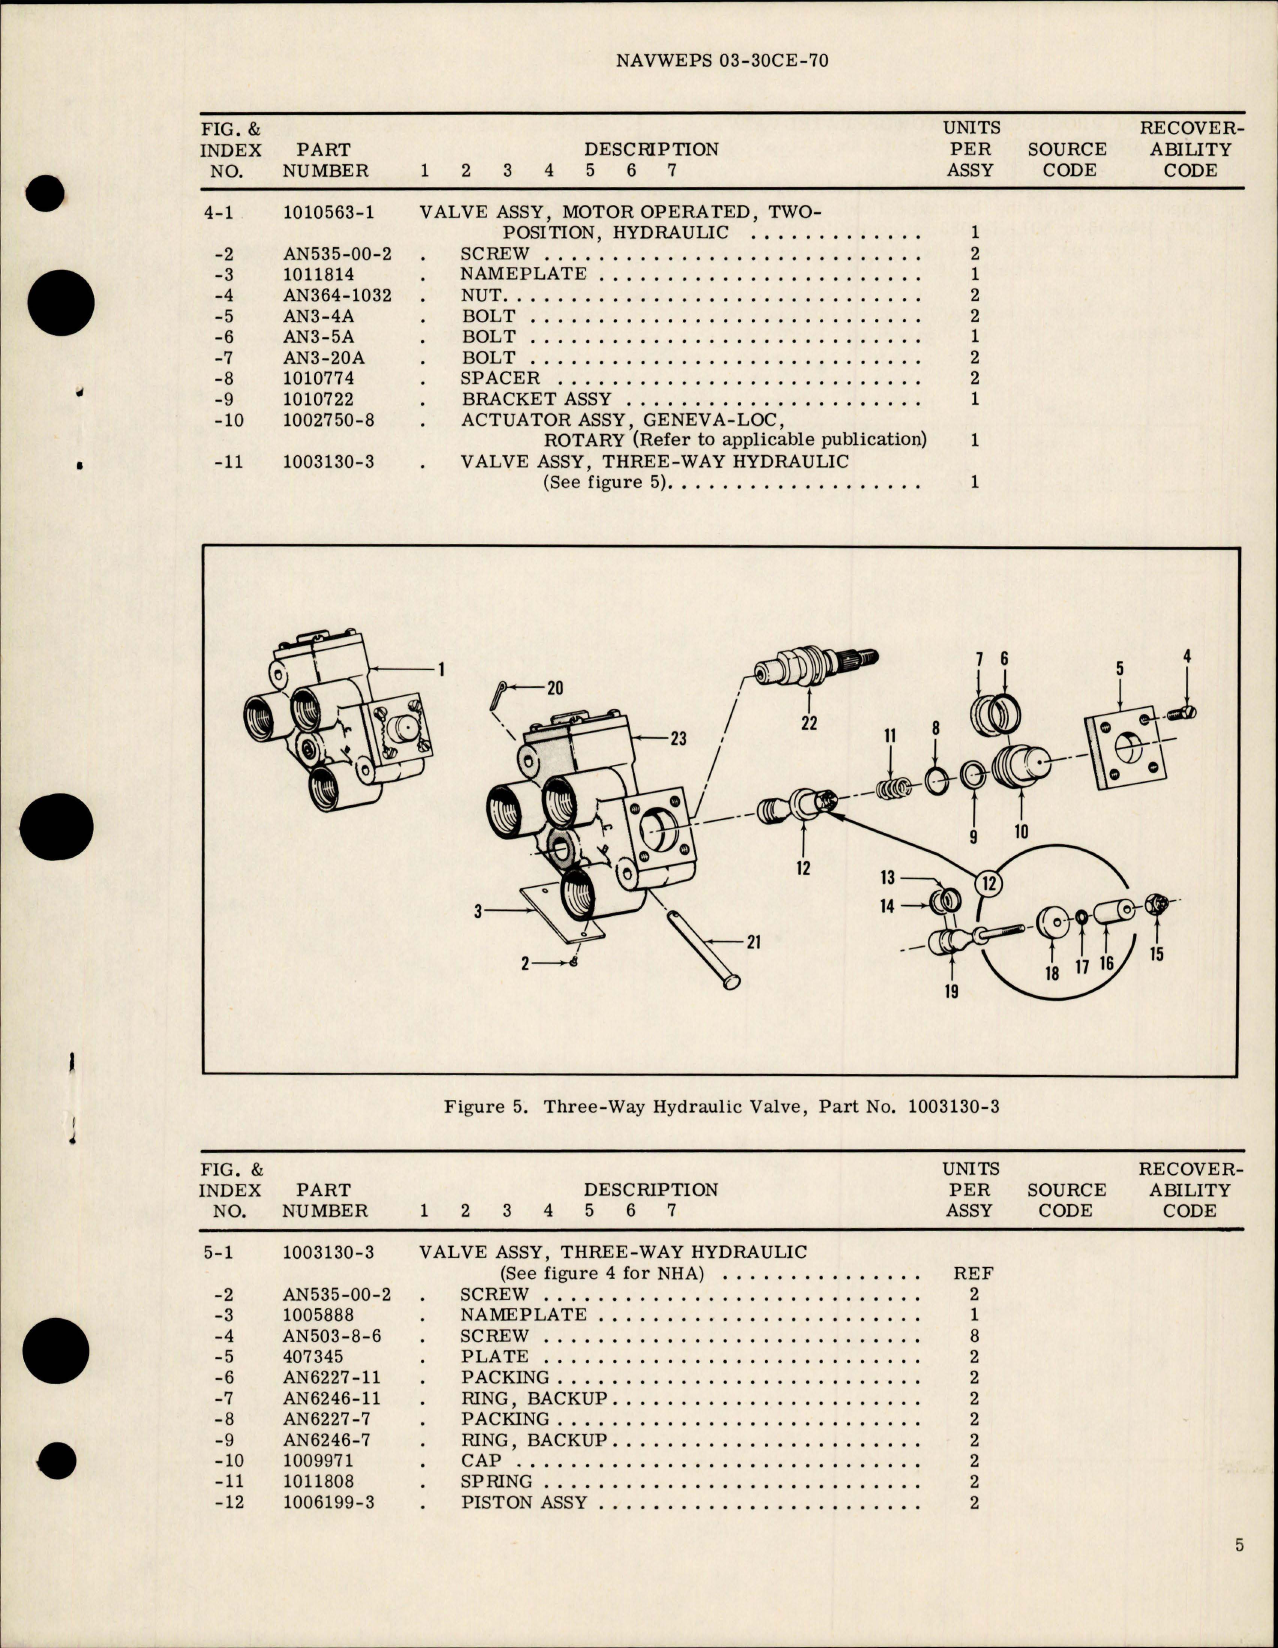 Sample page 5 from AirCorps Library document: Overhaul Instructions with Parts for Motor Operated Two-Position Hydraulic Valve Assembly - Part 1010563-1